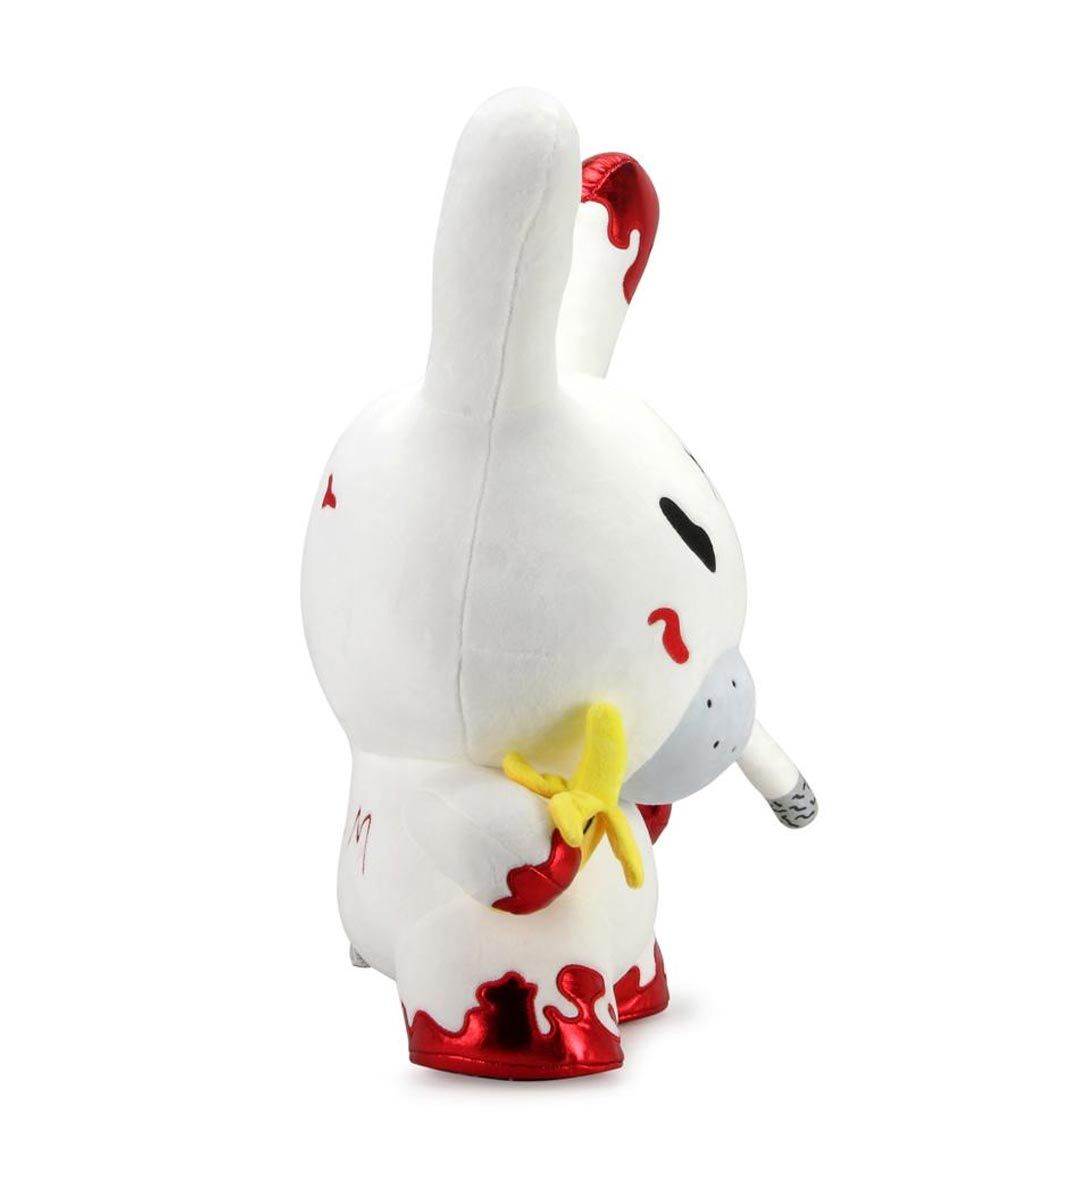 20" Dunny-Plush - Dunny Redrum